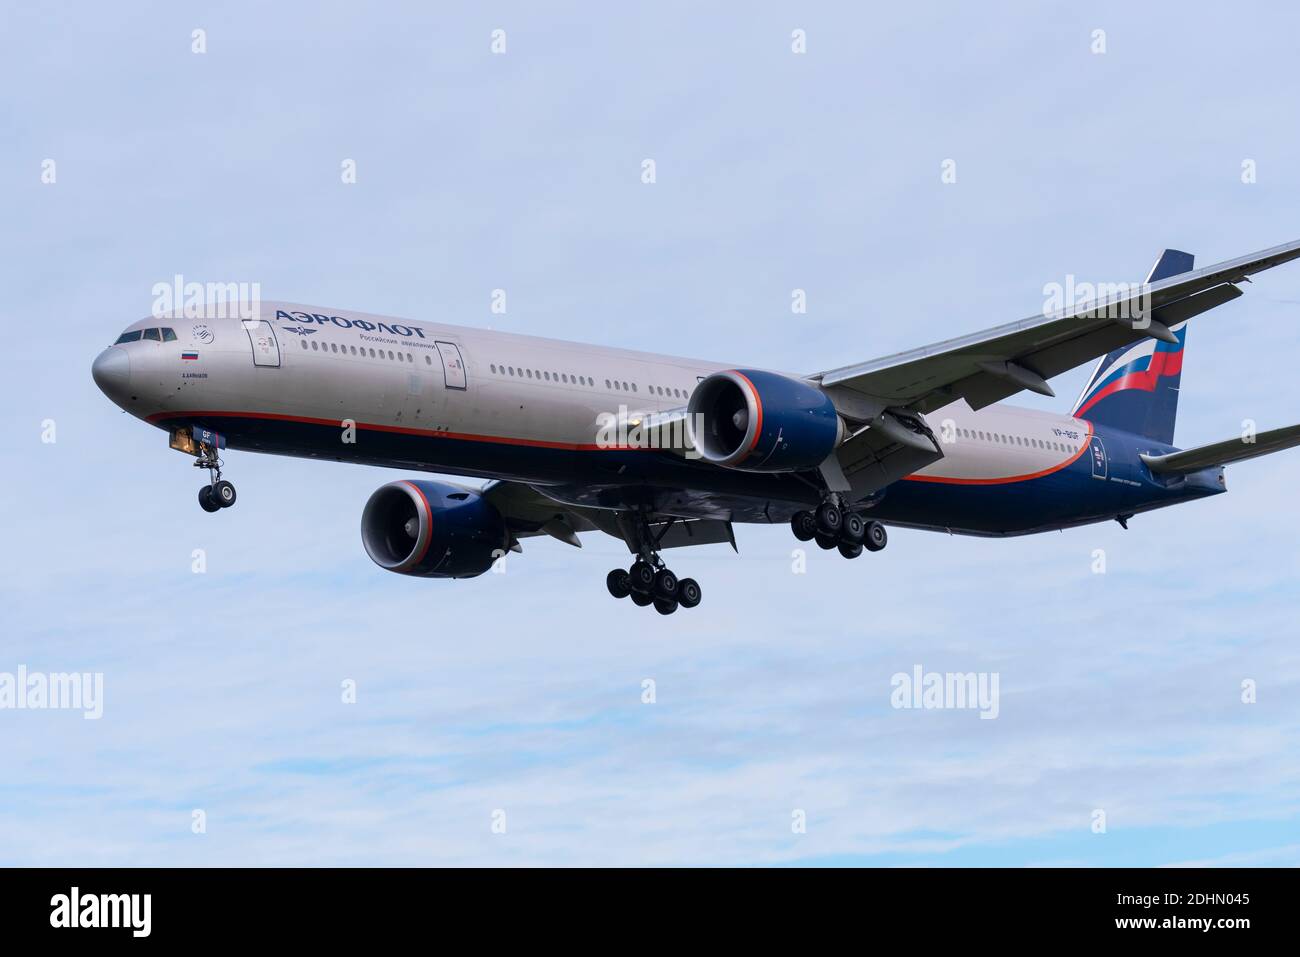 Aeroflot Russian Airlines Boeing 777 jet airliner plane landing at London Heathrow Airport, UK. American manufactured aircraft used by Russian airline Stock Photo